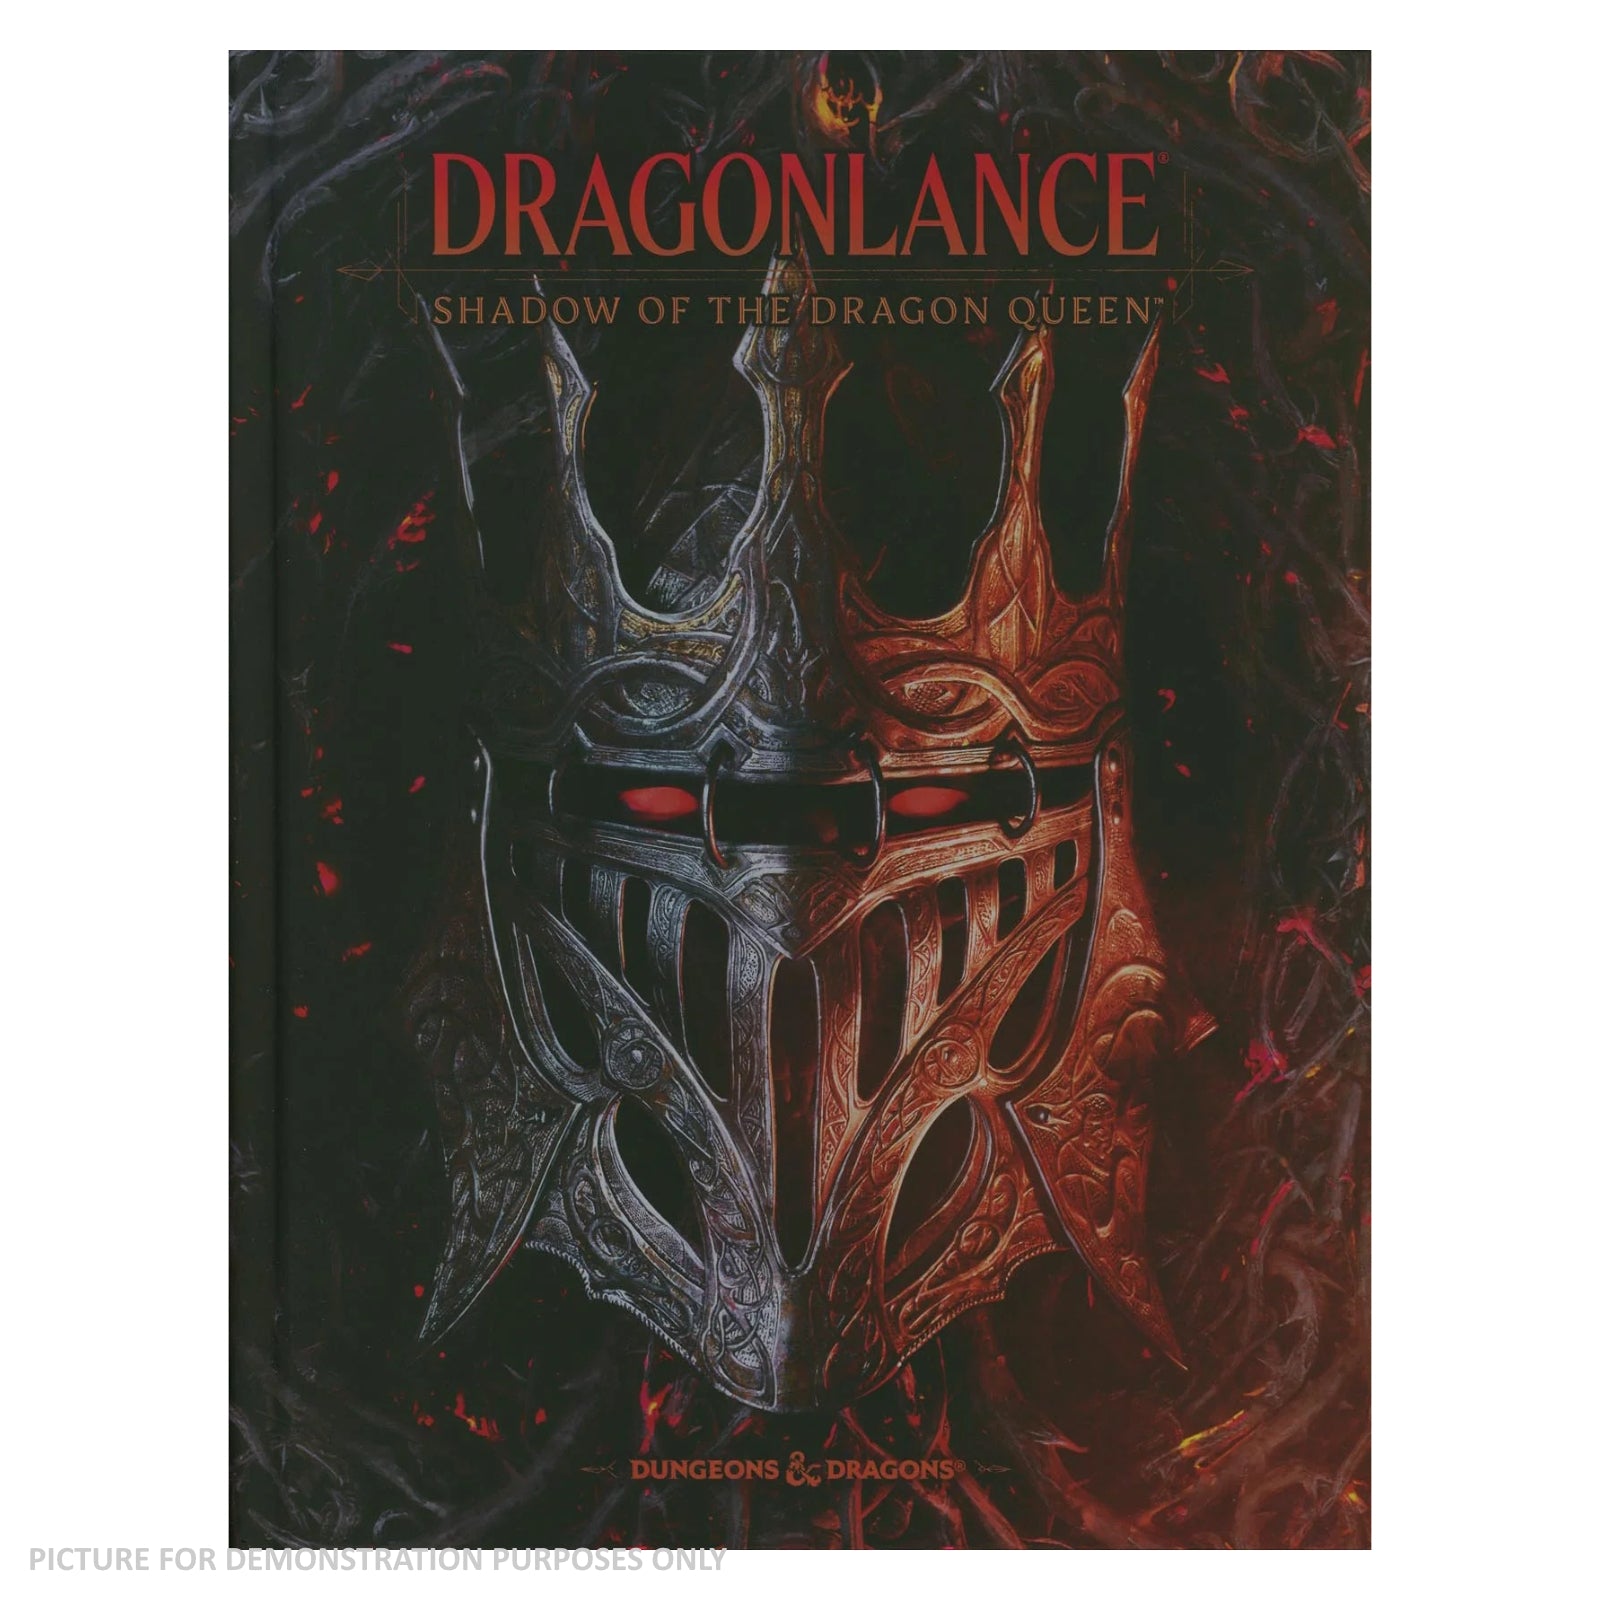 Dungeons & Dragons Dragonlance Shadow of the Dragon Queen Alternate Cover